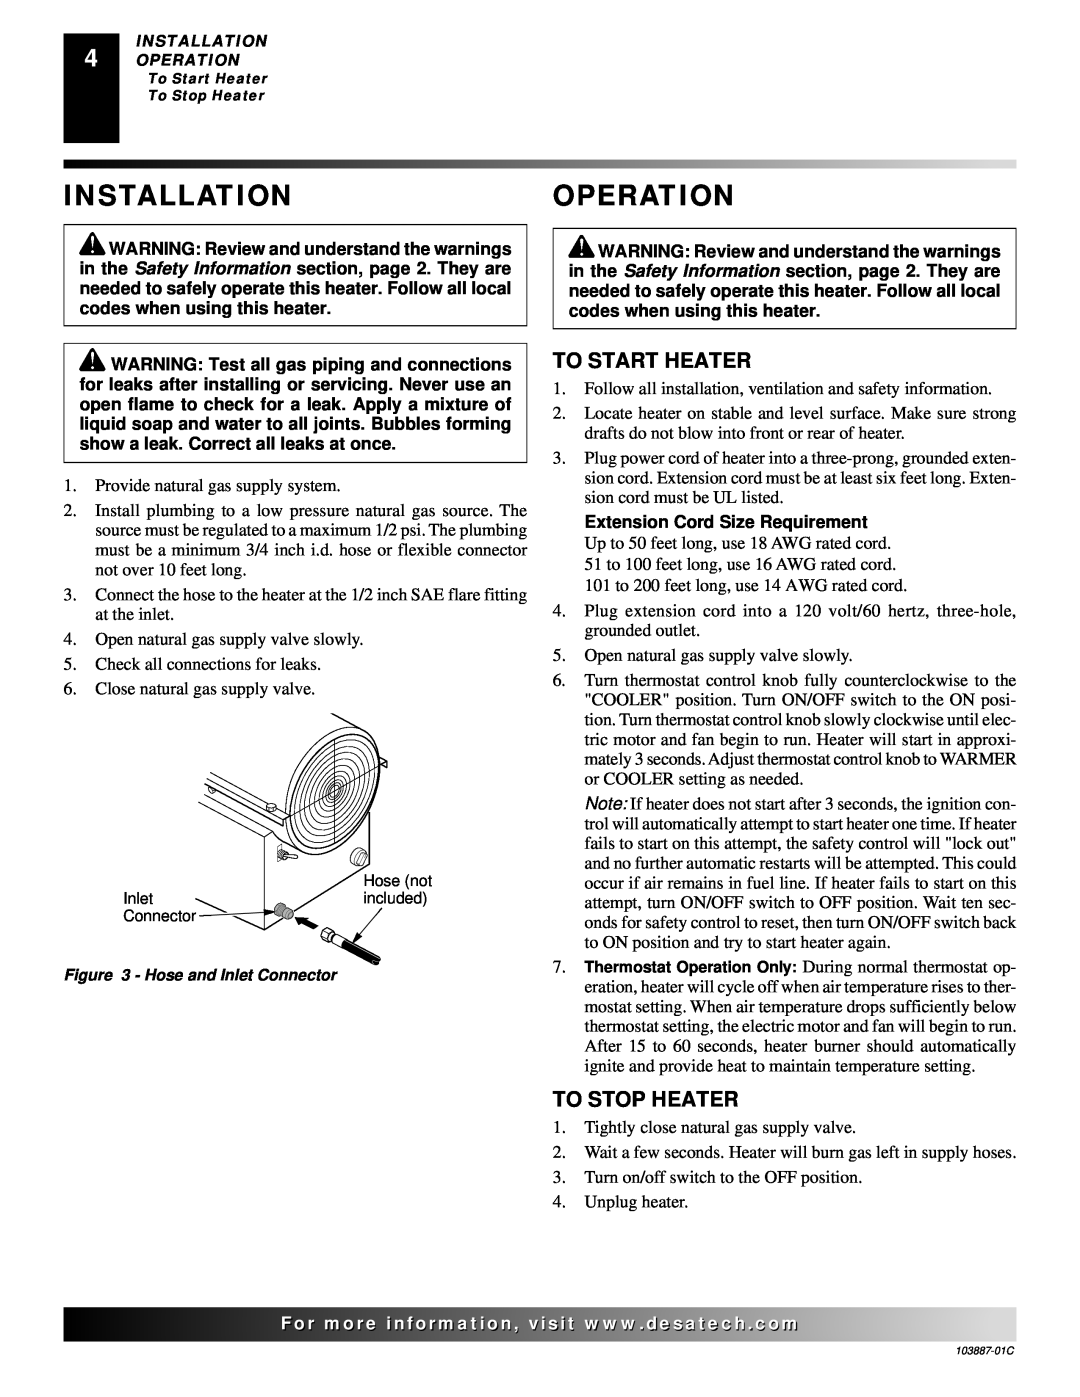 Desa BNG150T owner manual Installationoperation, To Start Heater, To Stop Heater, Extension Cord Size Requirement 